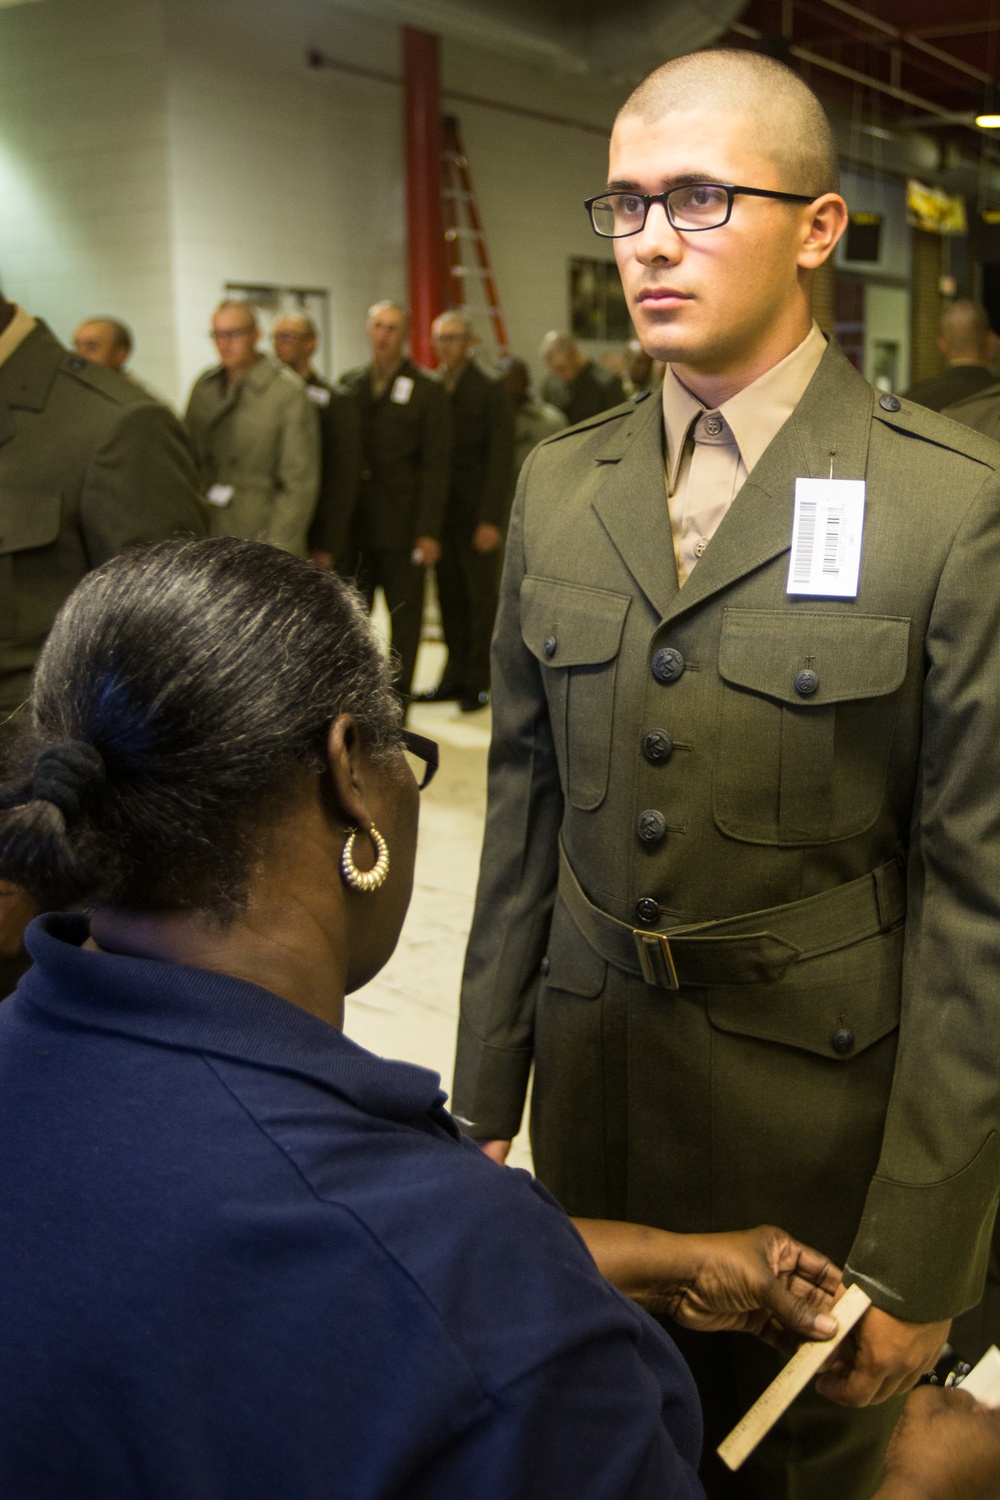 Marine recruits fitted for the Corps’ uniforms on Parris Island